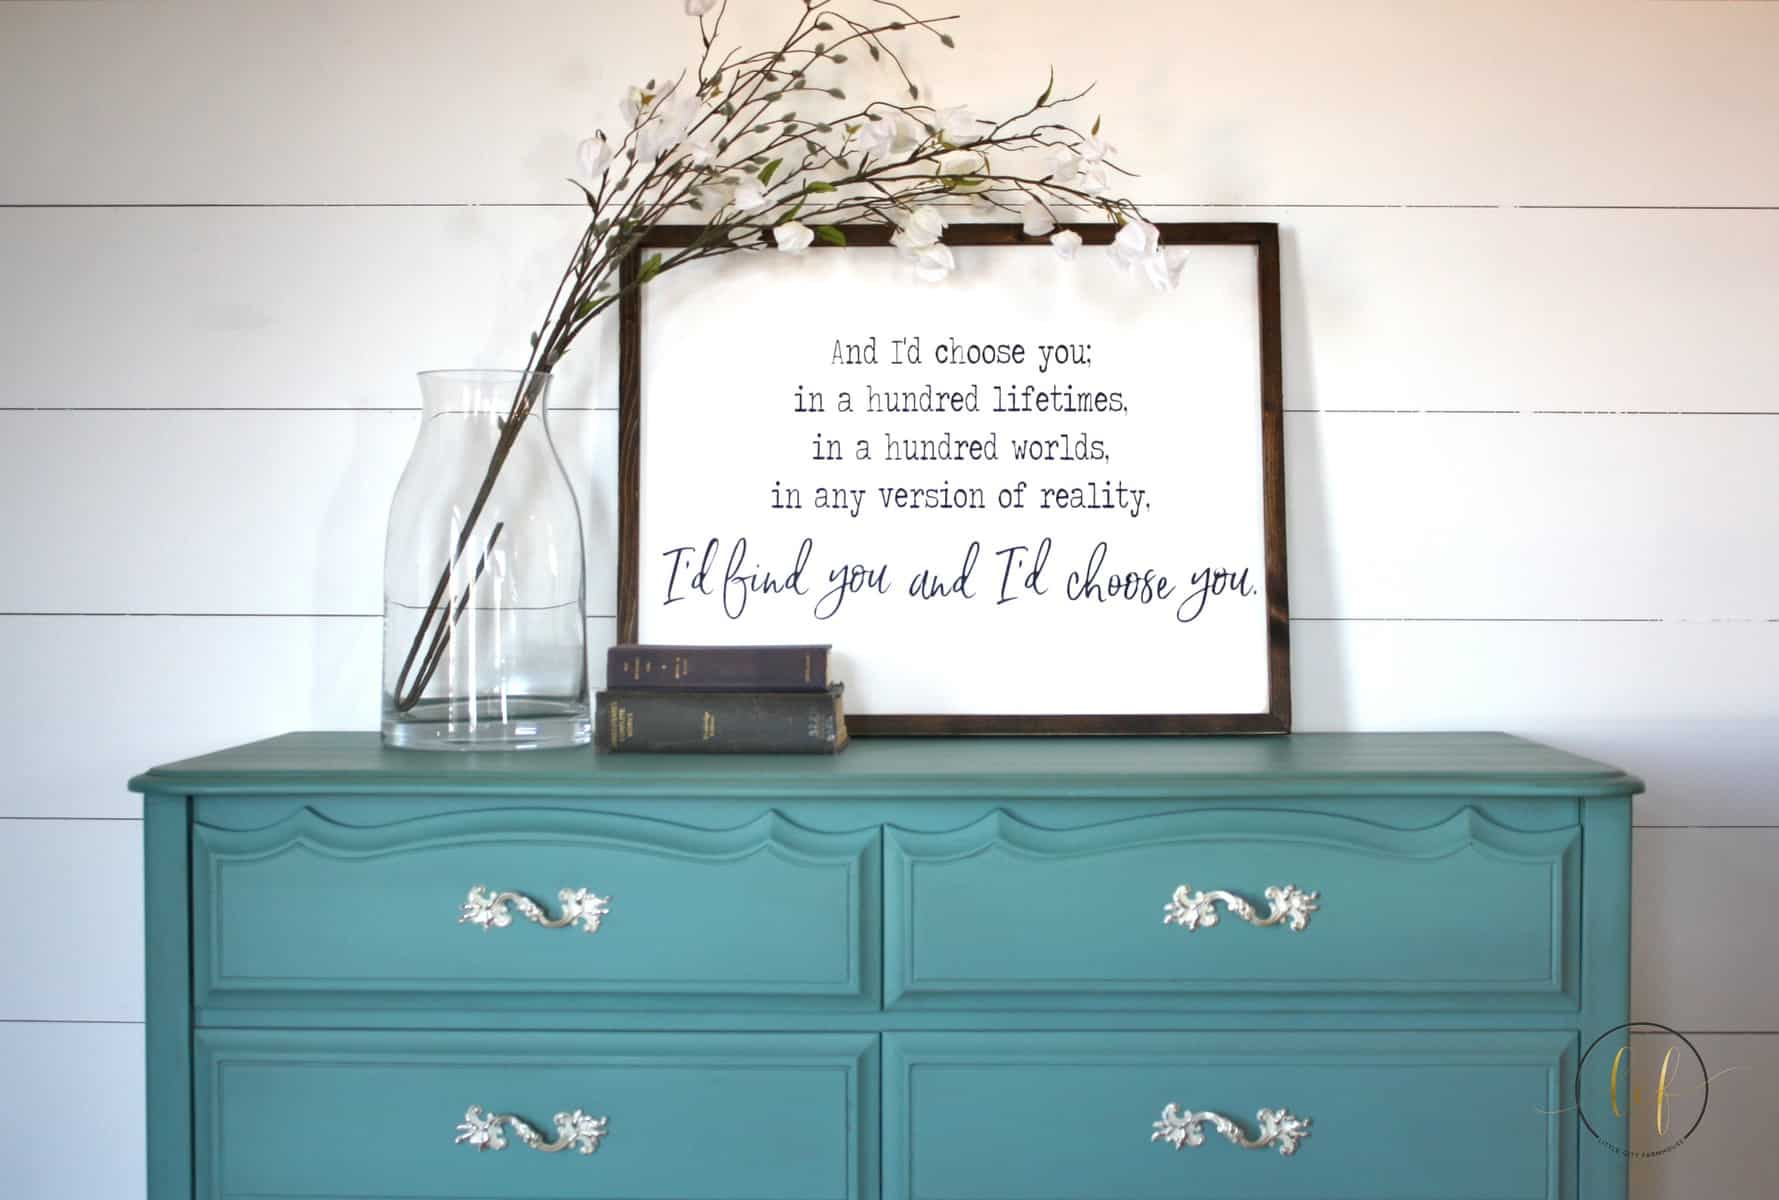 Bright, Bold, and Beautiful #DIY #furniturepaint #paintedfurniture #chalkpaint #turquoise #teal #bliss #blue #dresser #bedroom #countrychicpaint - blog.countrychicpaint.com